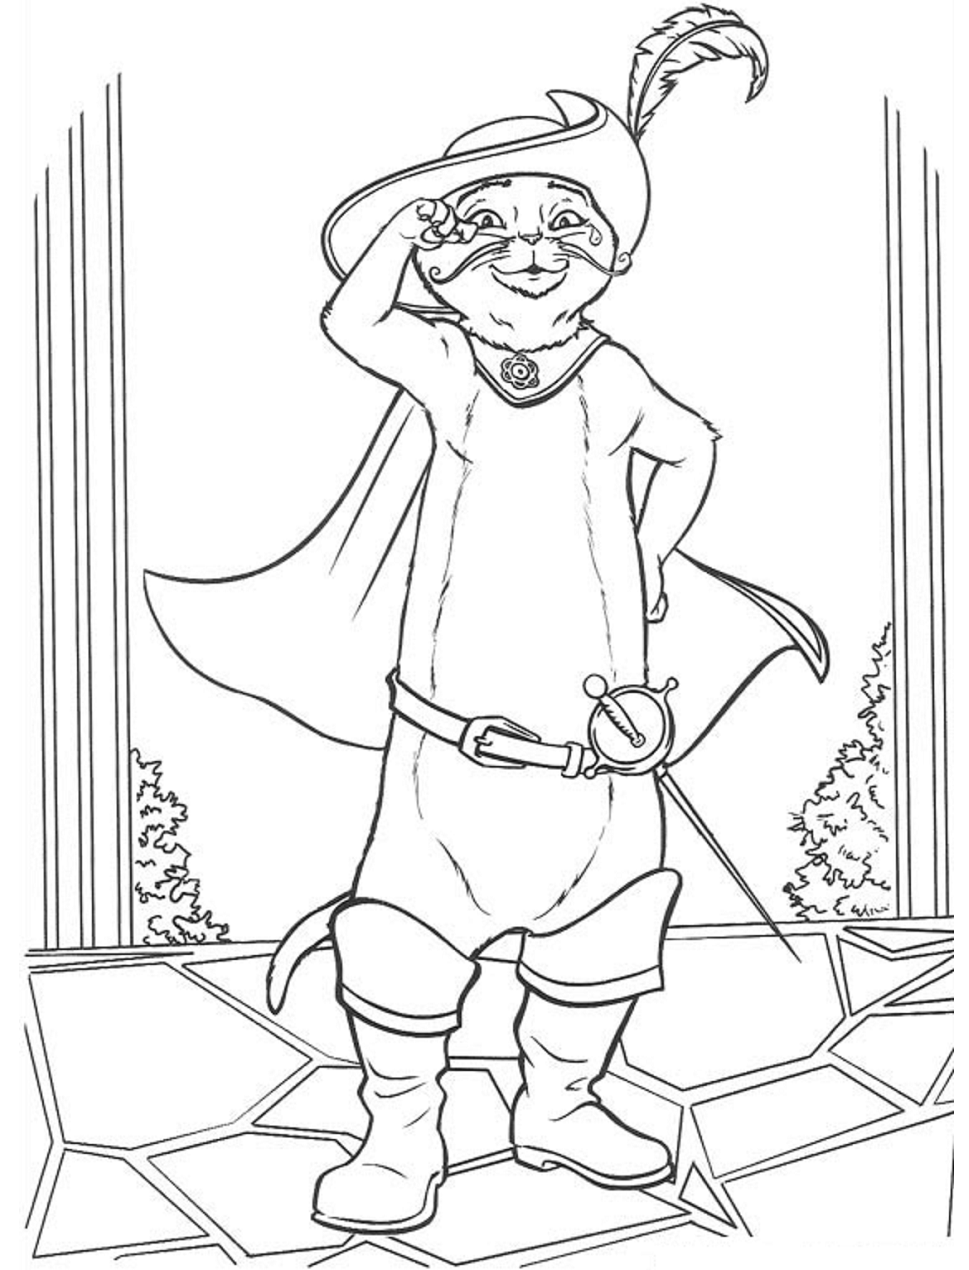 Download Cool Puss In Boots Coloring Page - Free Printable Coloring ...